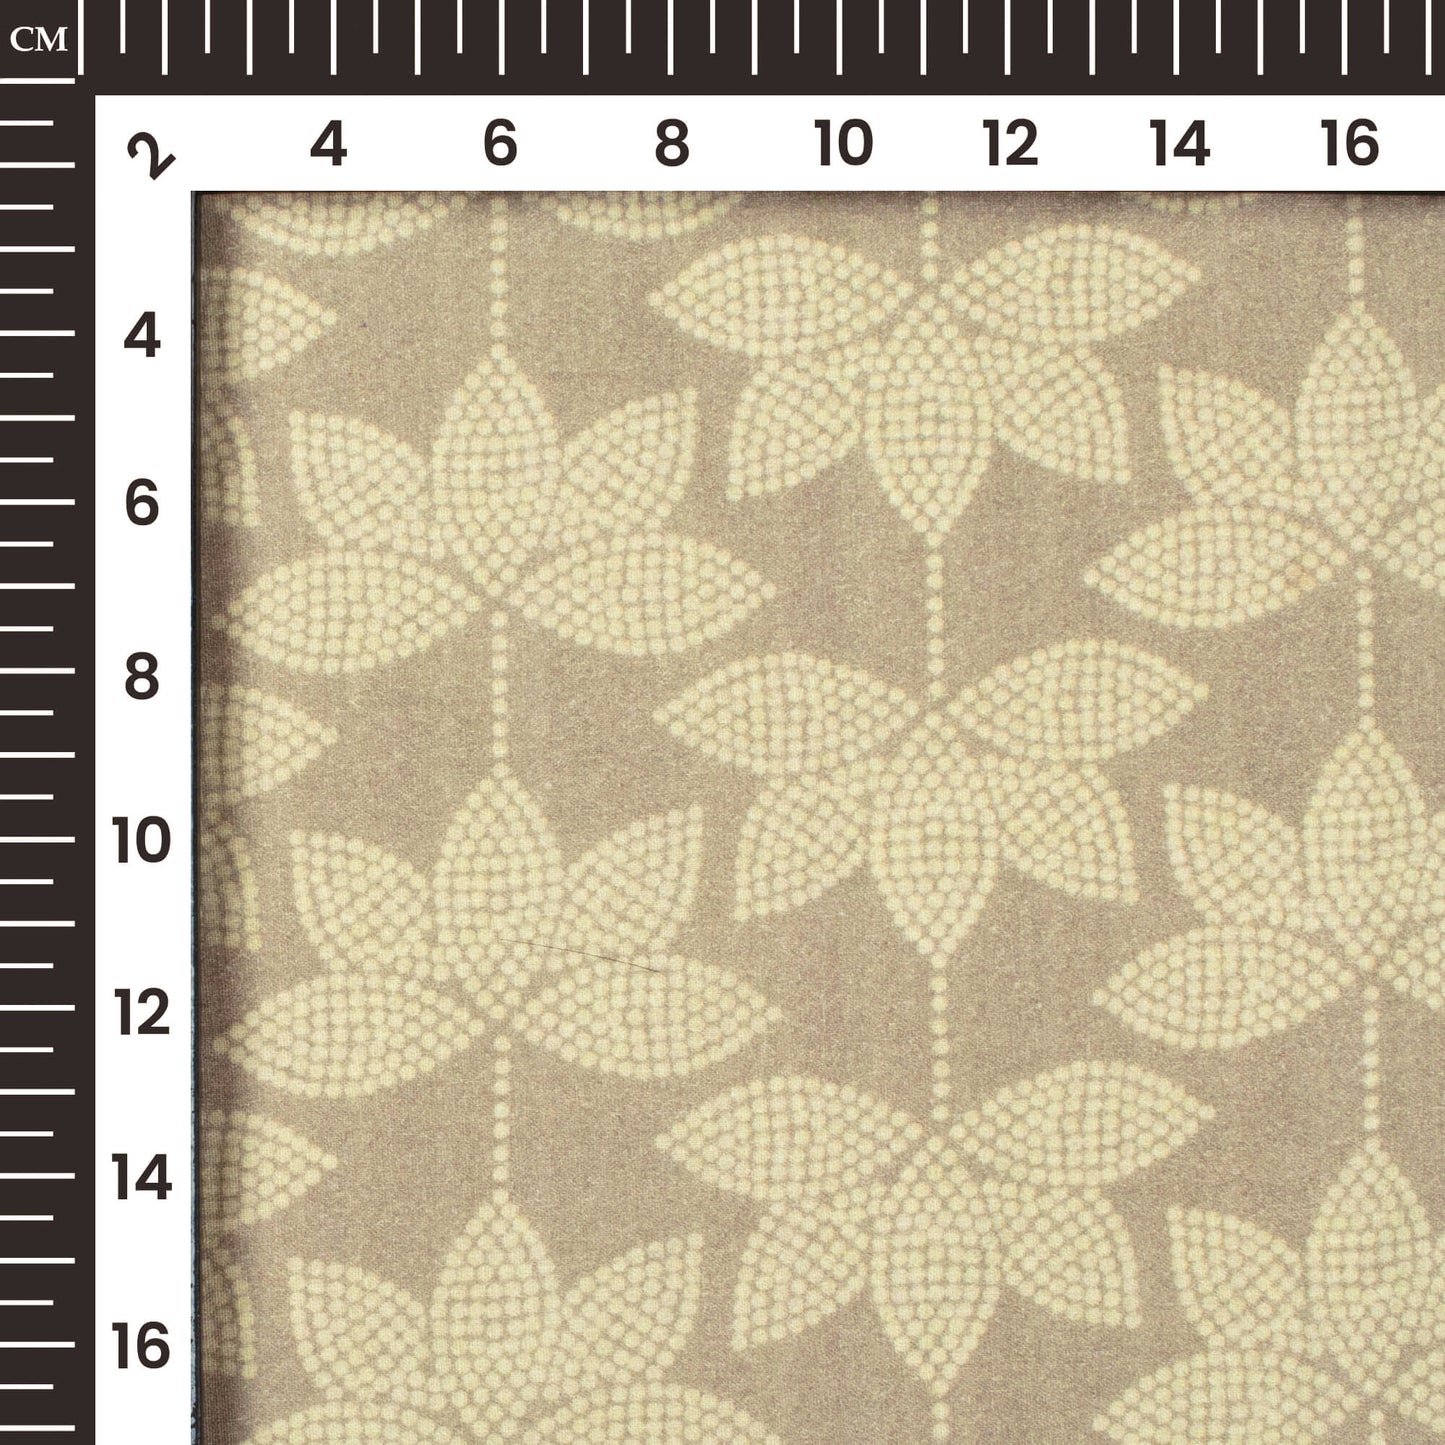 Brown And Beige Kashish Digital Print Cotton Cambric Fabric